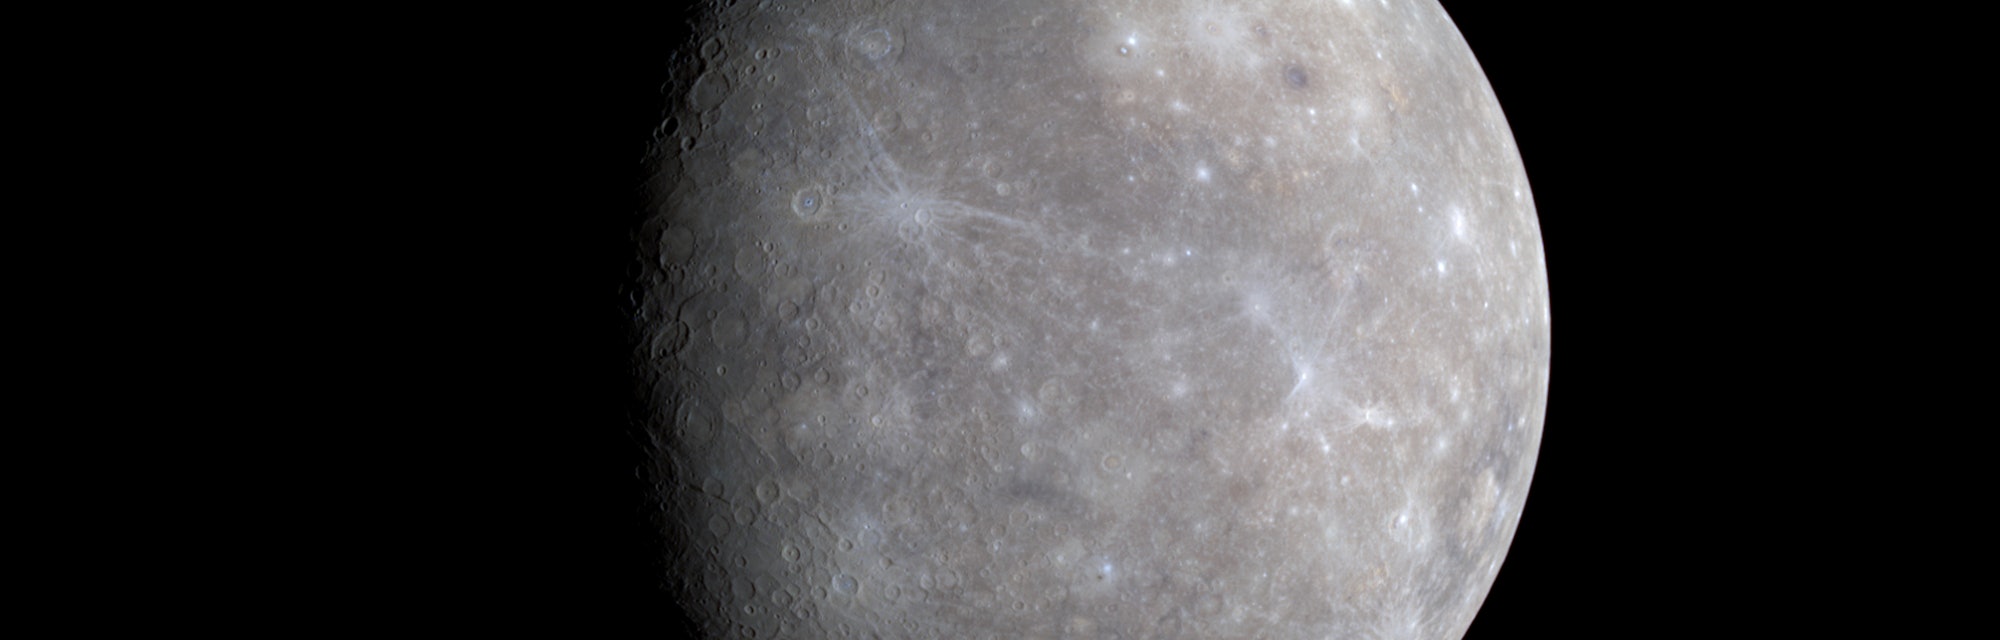 color differences on Mercury's surface that cannot be seen in black-and-white (single-color) images